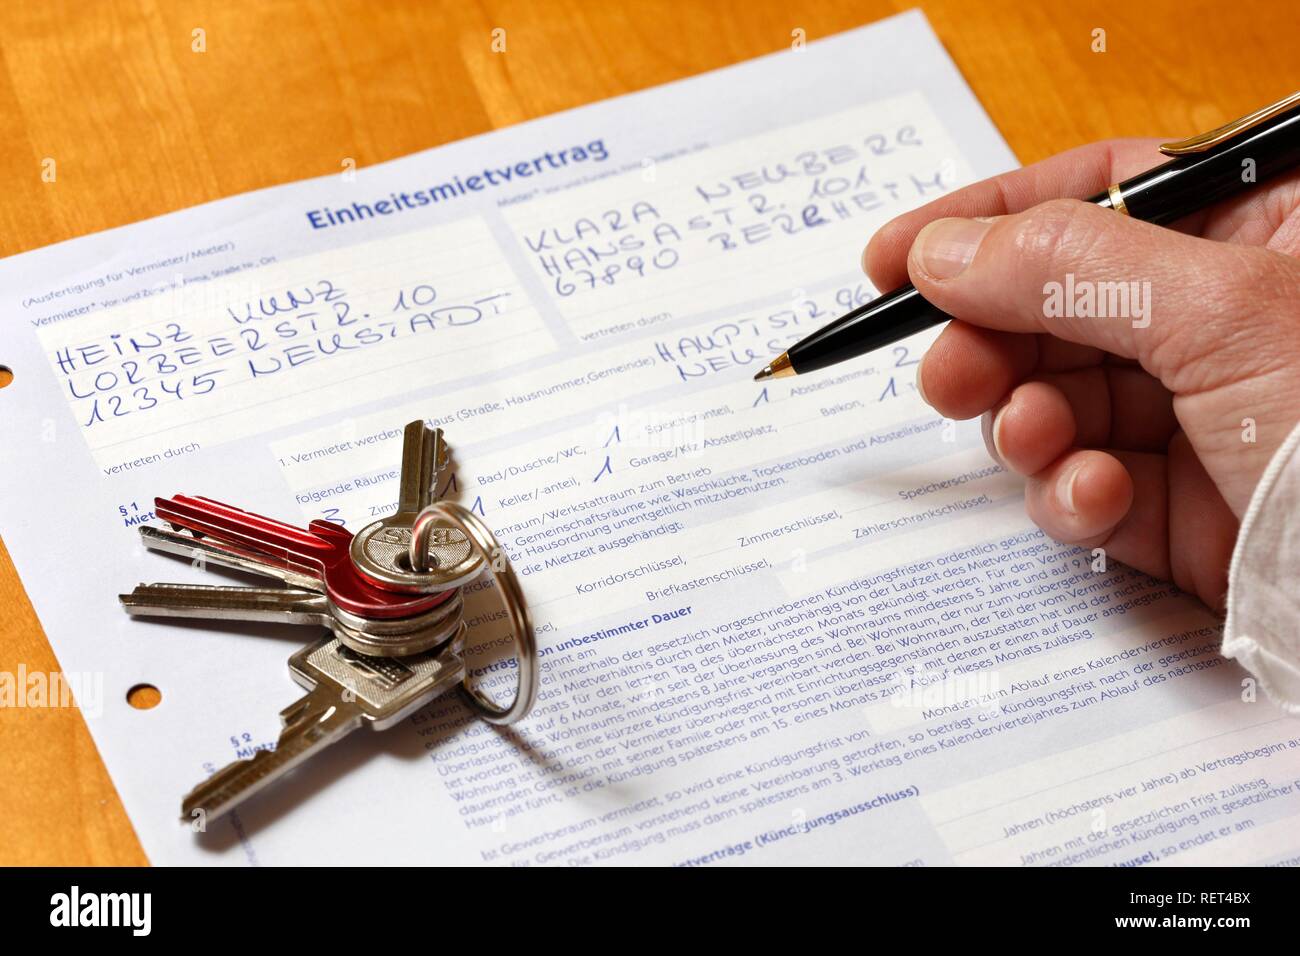 Filling in a standard rental contract, private rental appartment Stock Photo